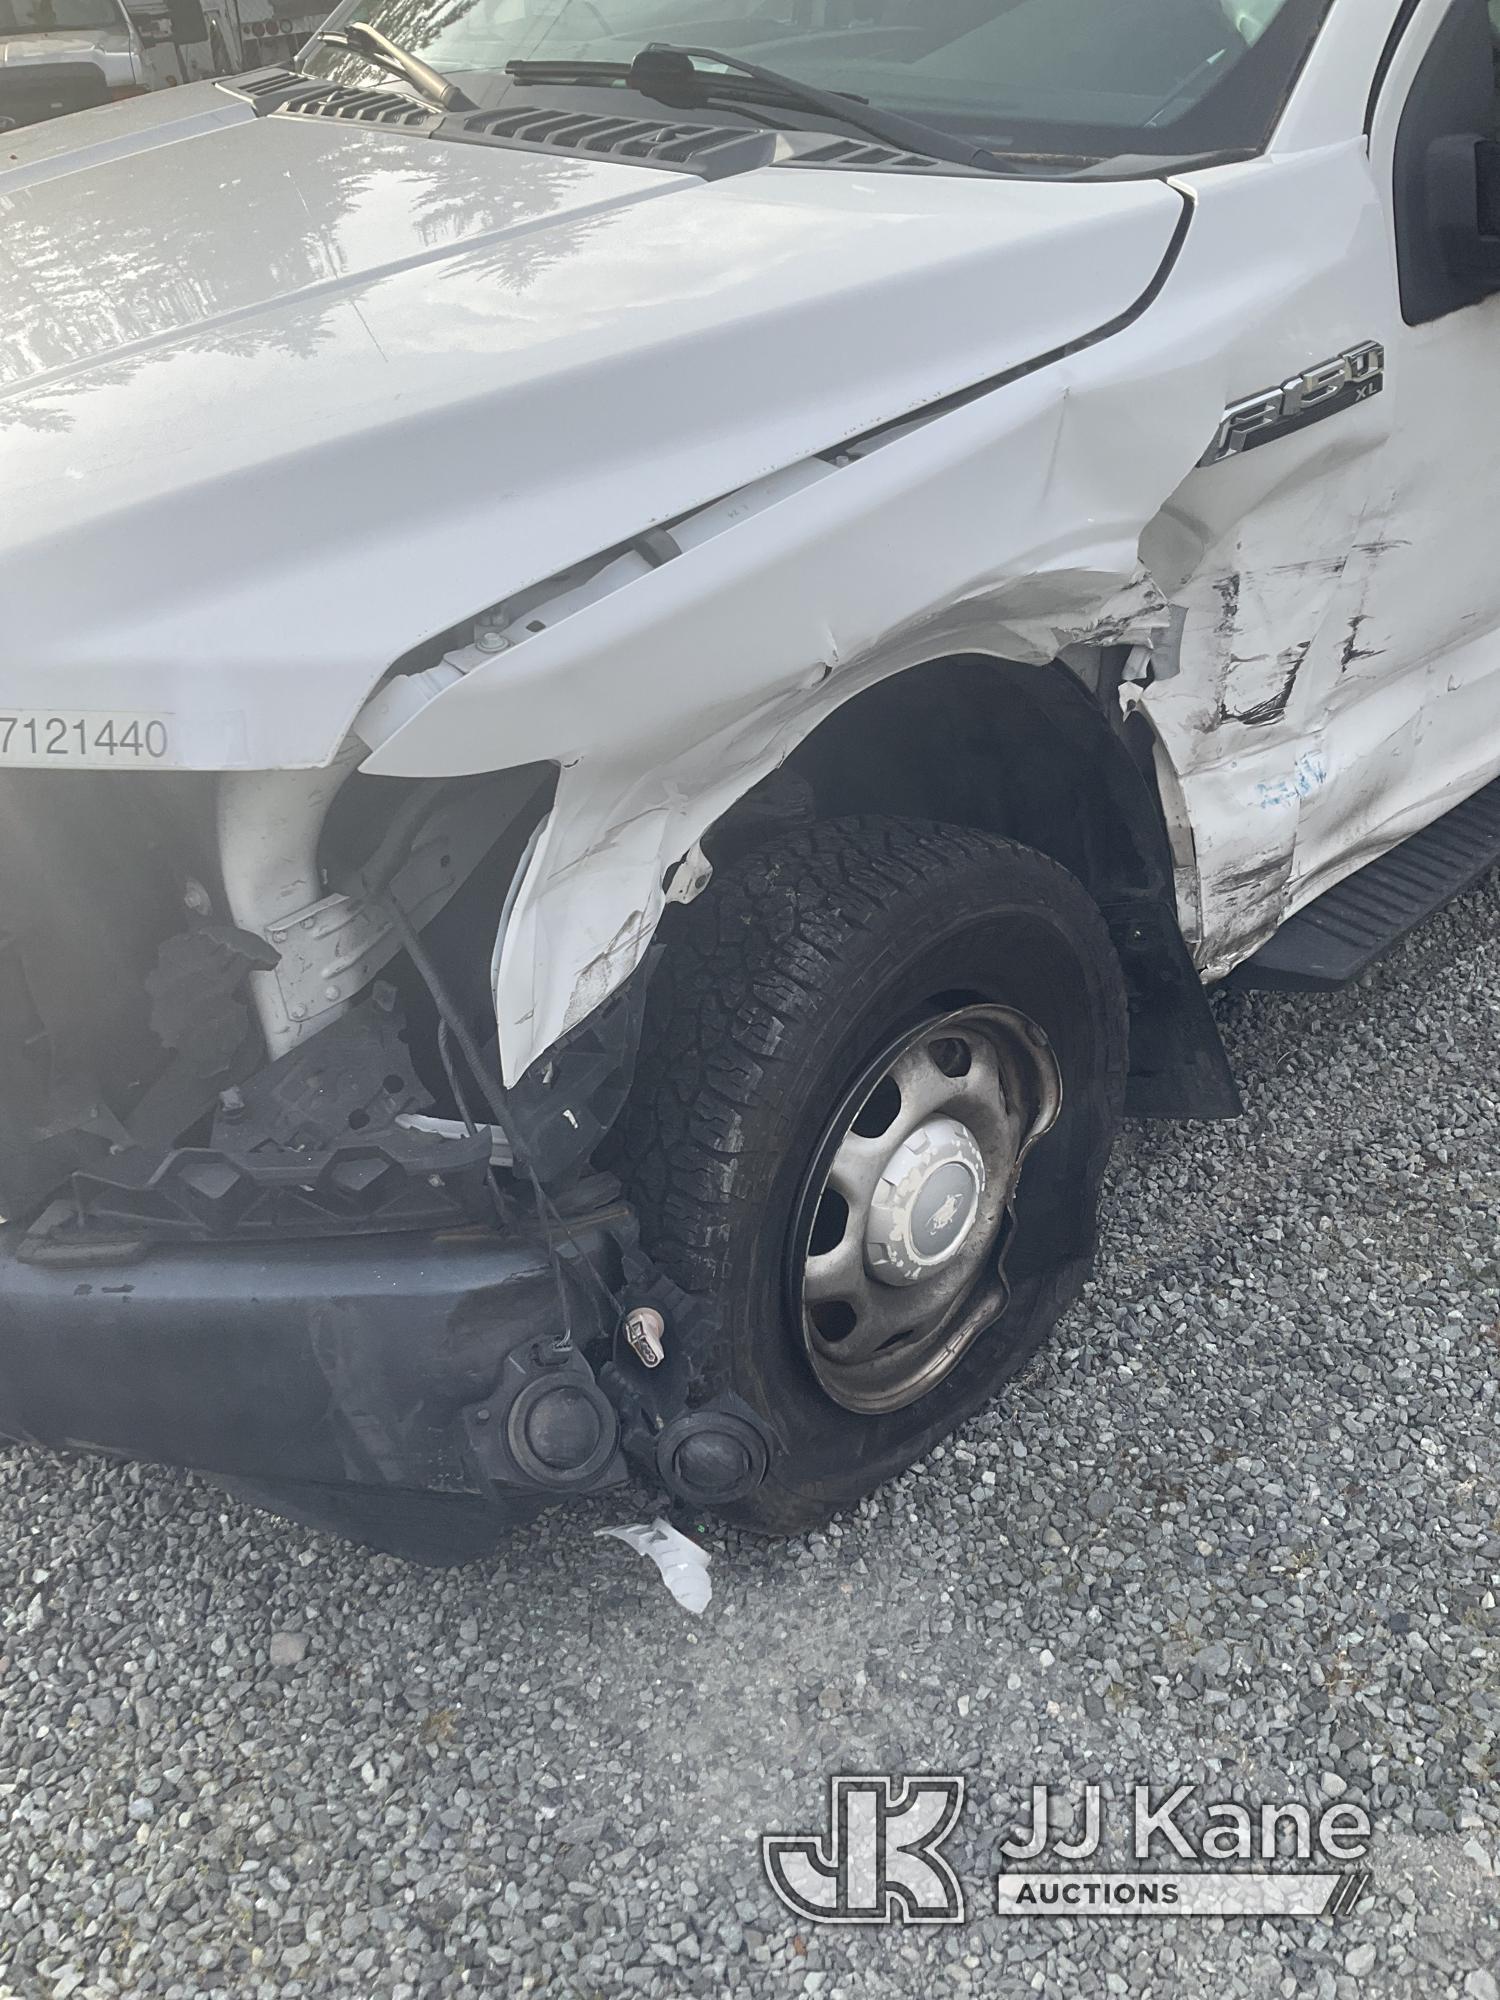 (Eatonville, WA) 2016 Ford F150 4x4 Extended-Cab Pickup Truck Not Running, Condition Unknown, Wrecke